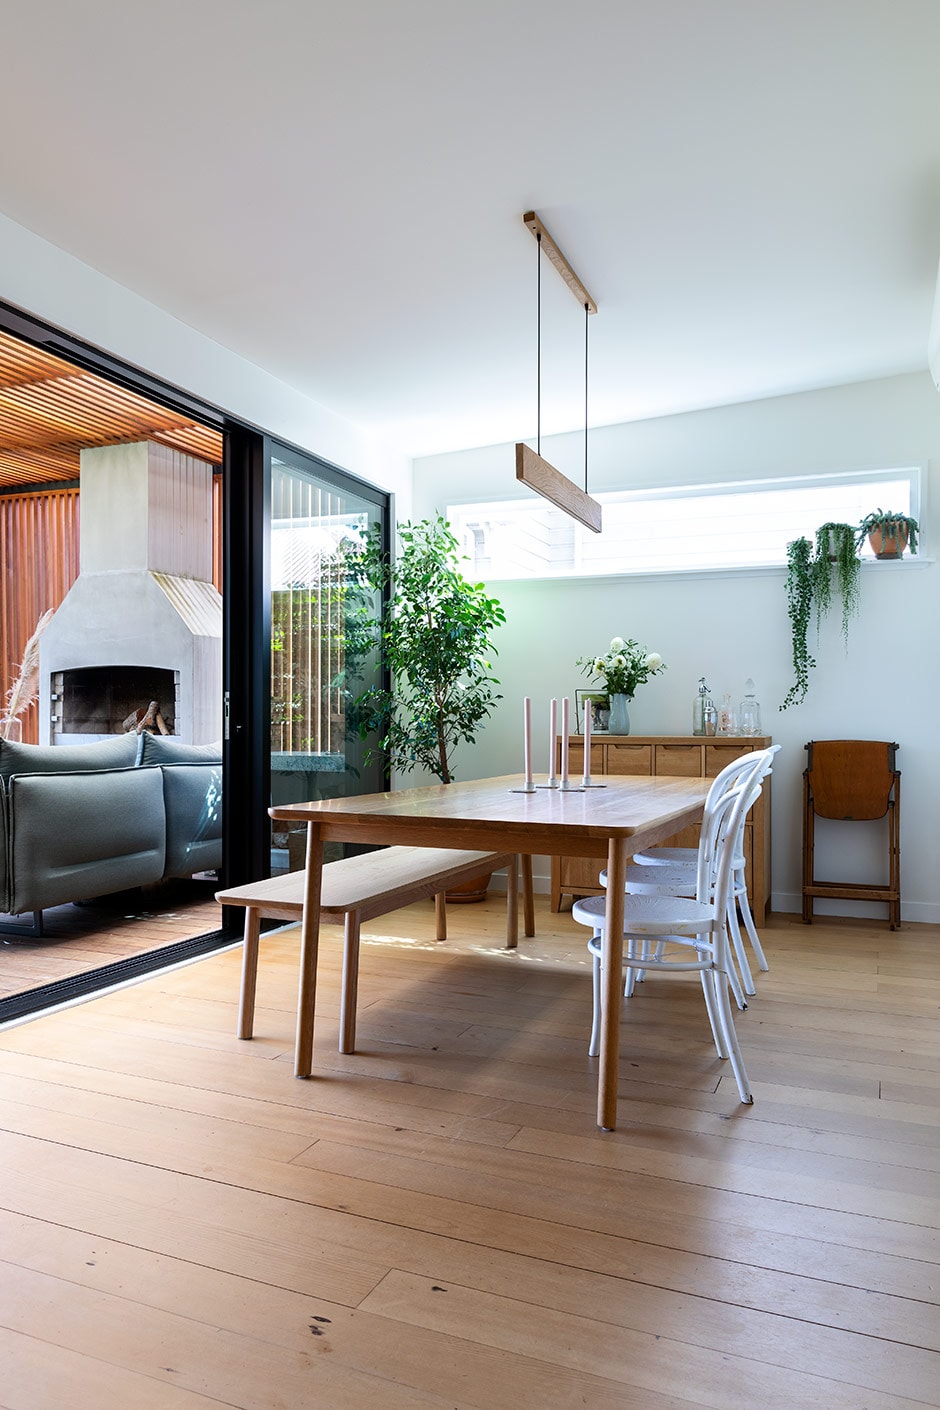 The renovation of this Kingsland villa turned it into a real sanctuary